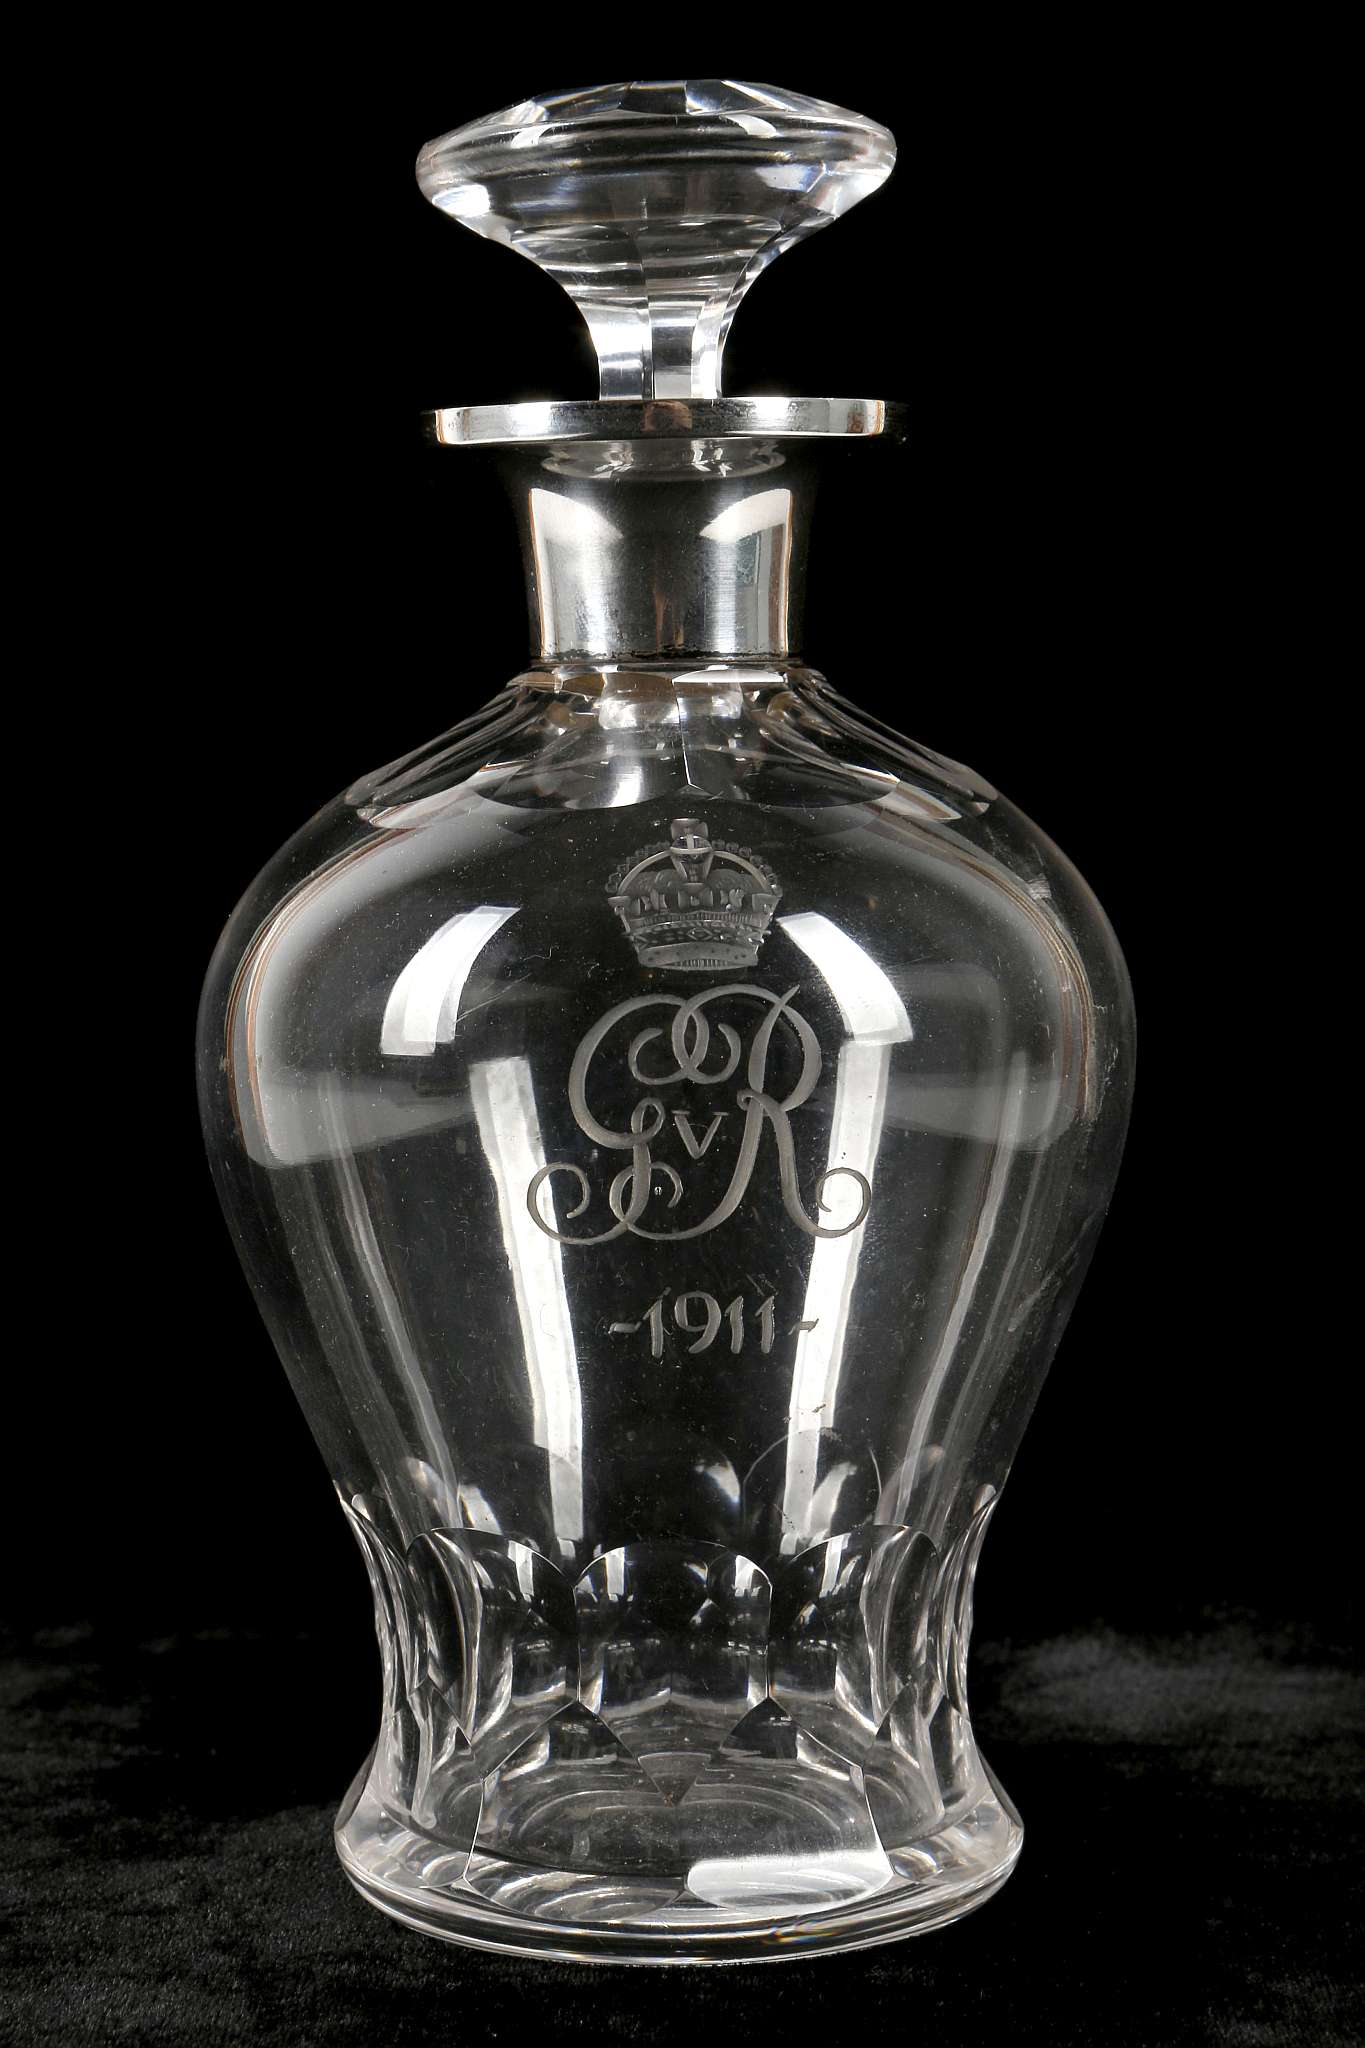 An early George V period novelty crystal cut glass decanter and stopper, having hallmarked silver